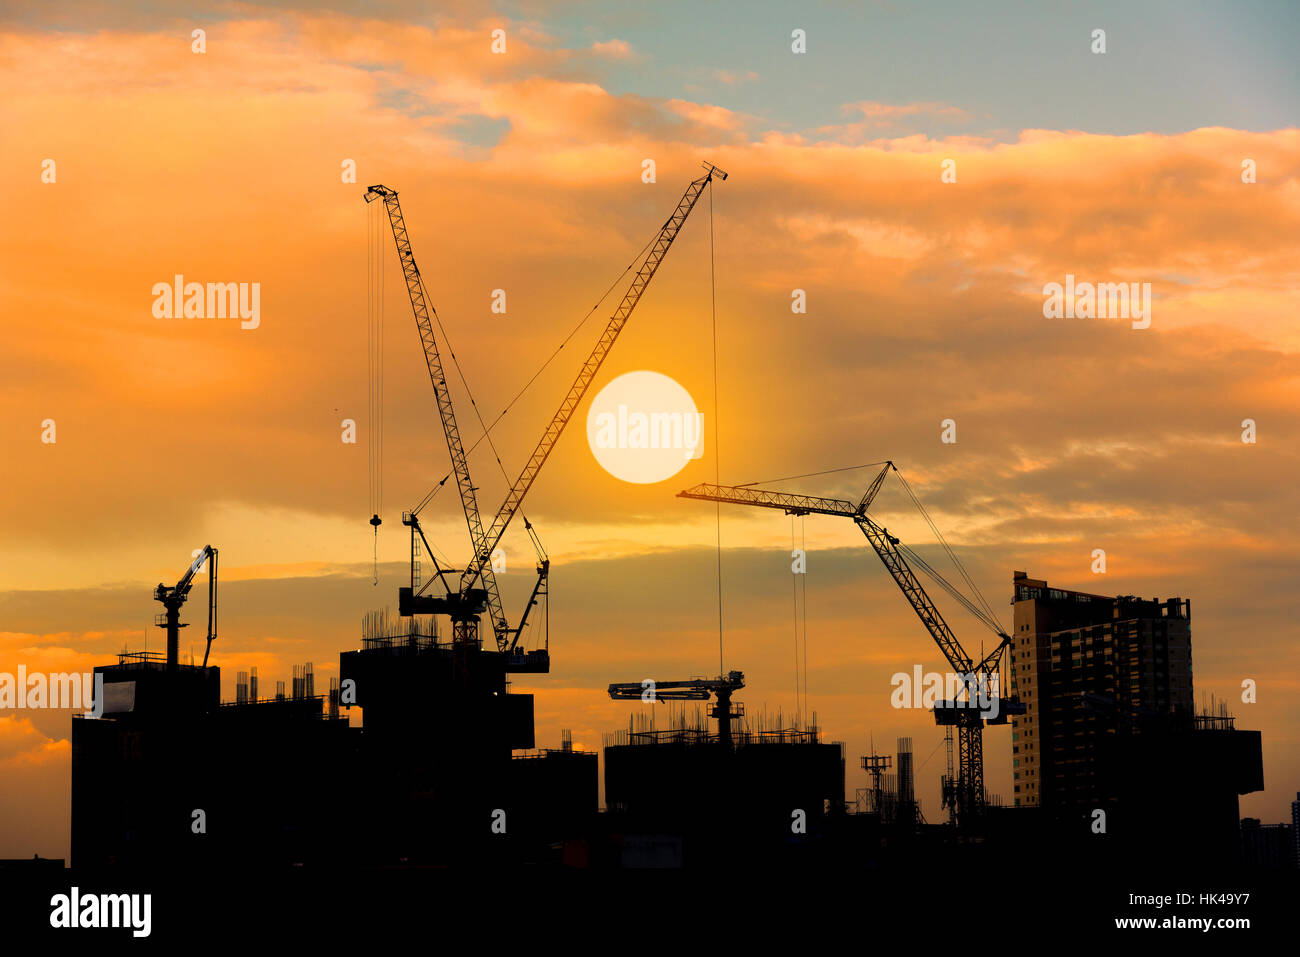 Construction site silhouette on tower building rooftop twilight sunset Stock Photo